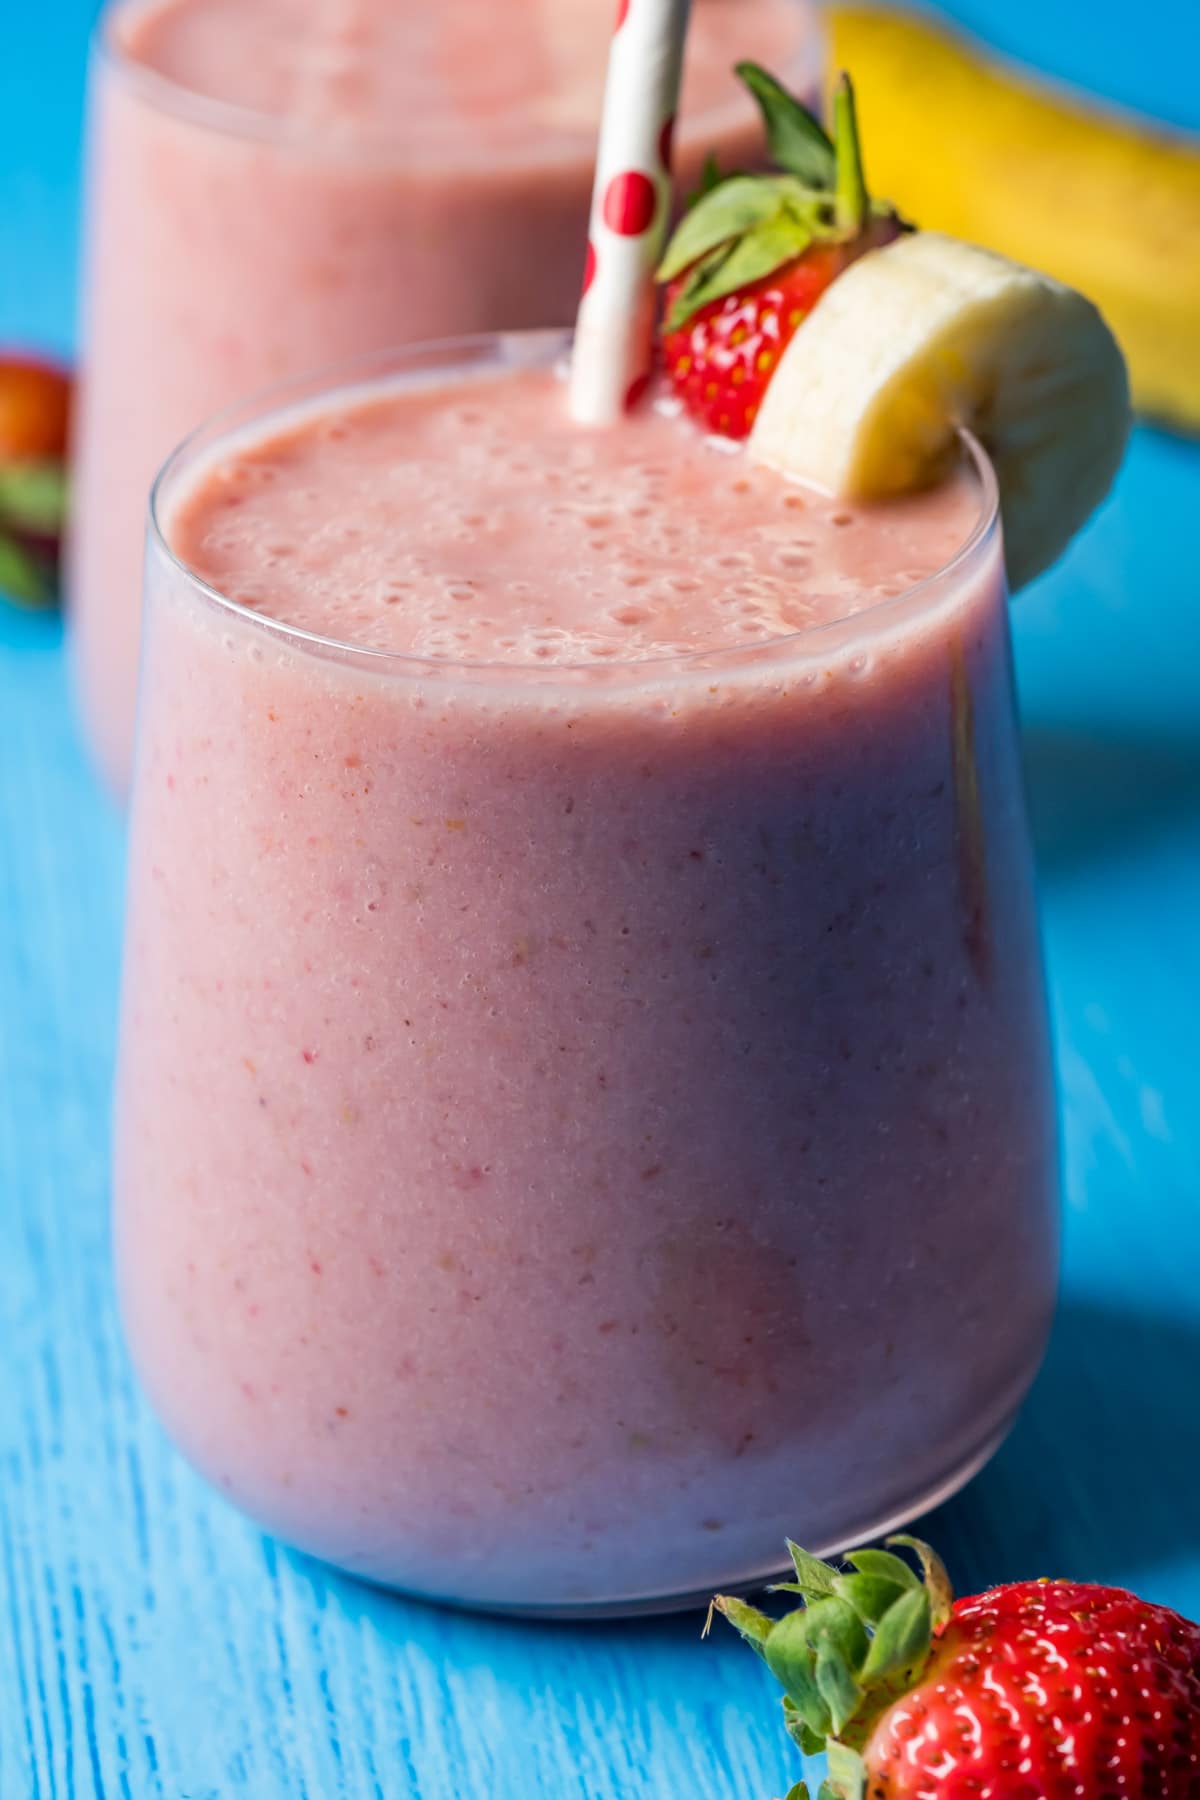 Strawberry banana smoothie in glasses with stripey straws.